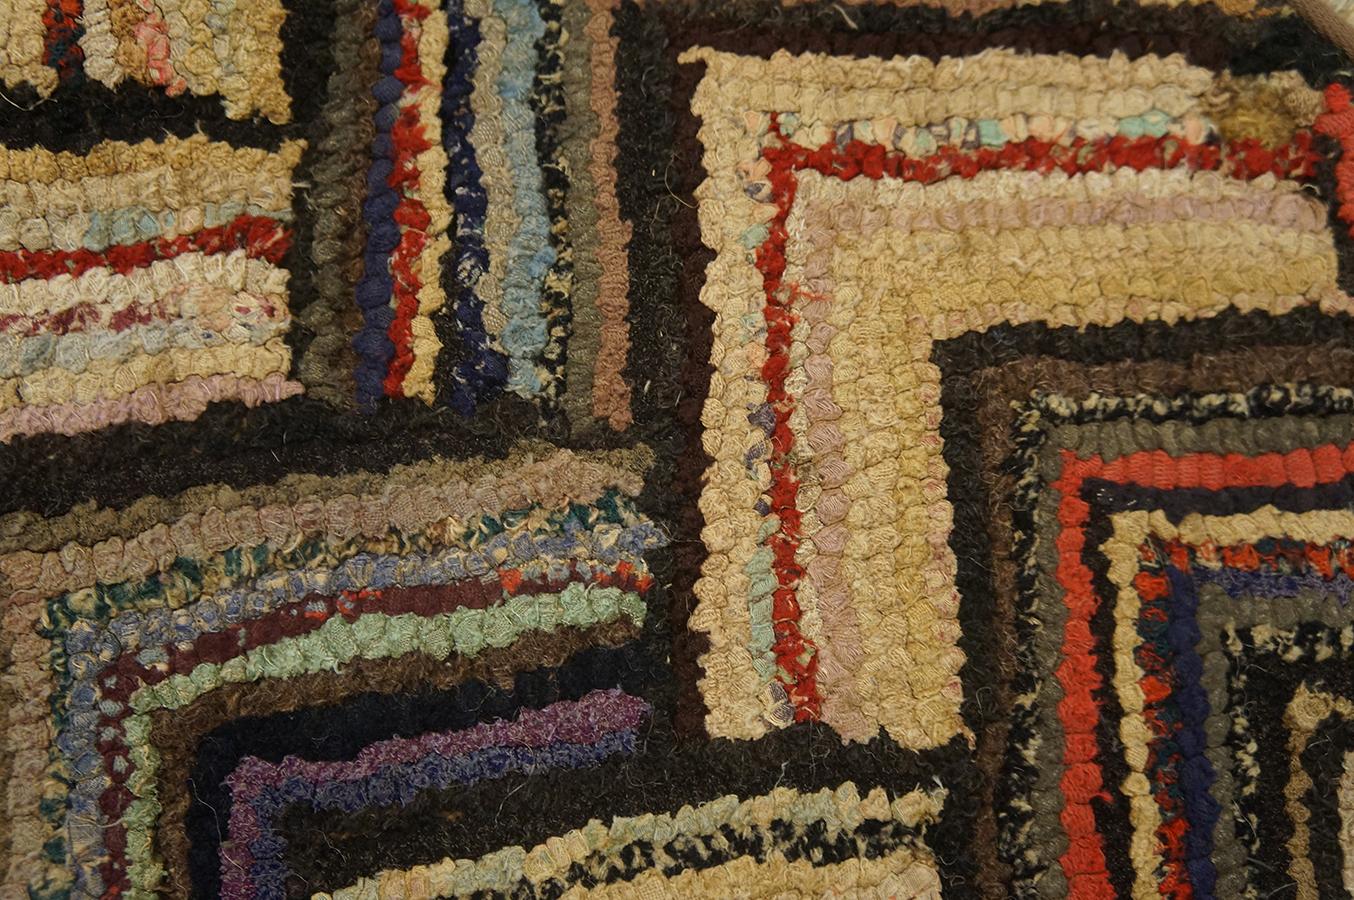 Early 20th Century American Hooked Rug ( 2' 7'' x 4' 6'' - 78 x 137 cm ) For Sale 6